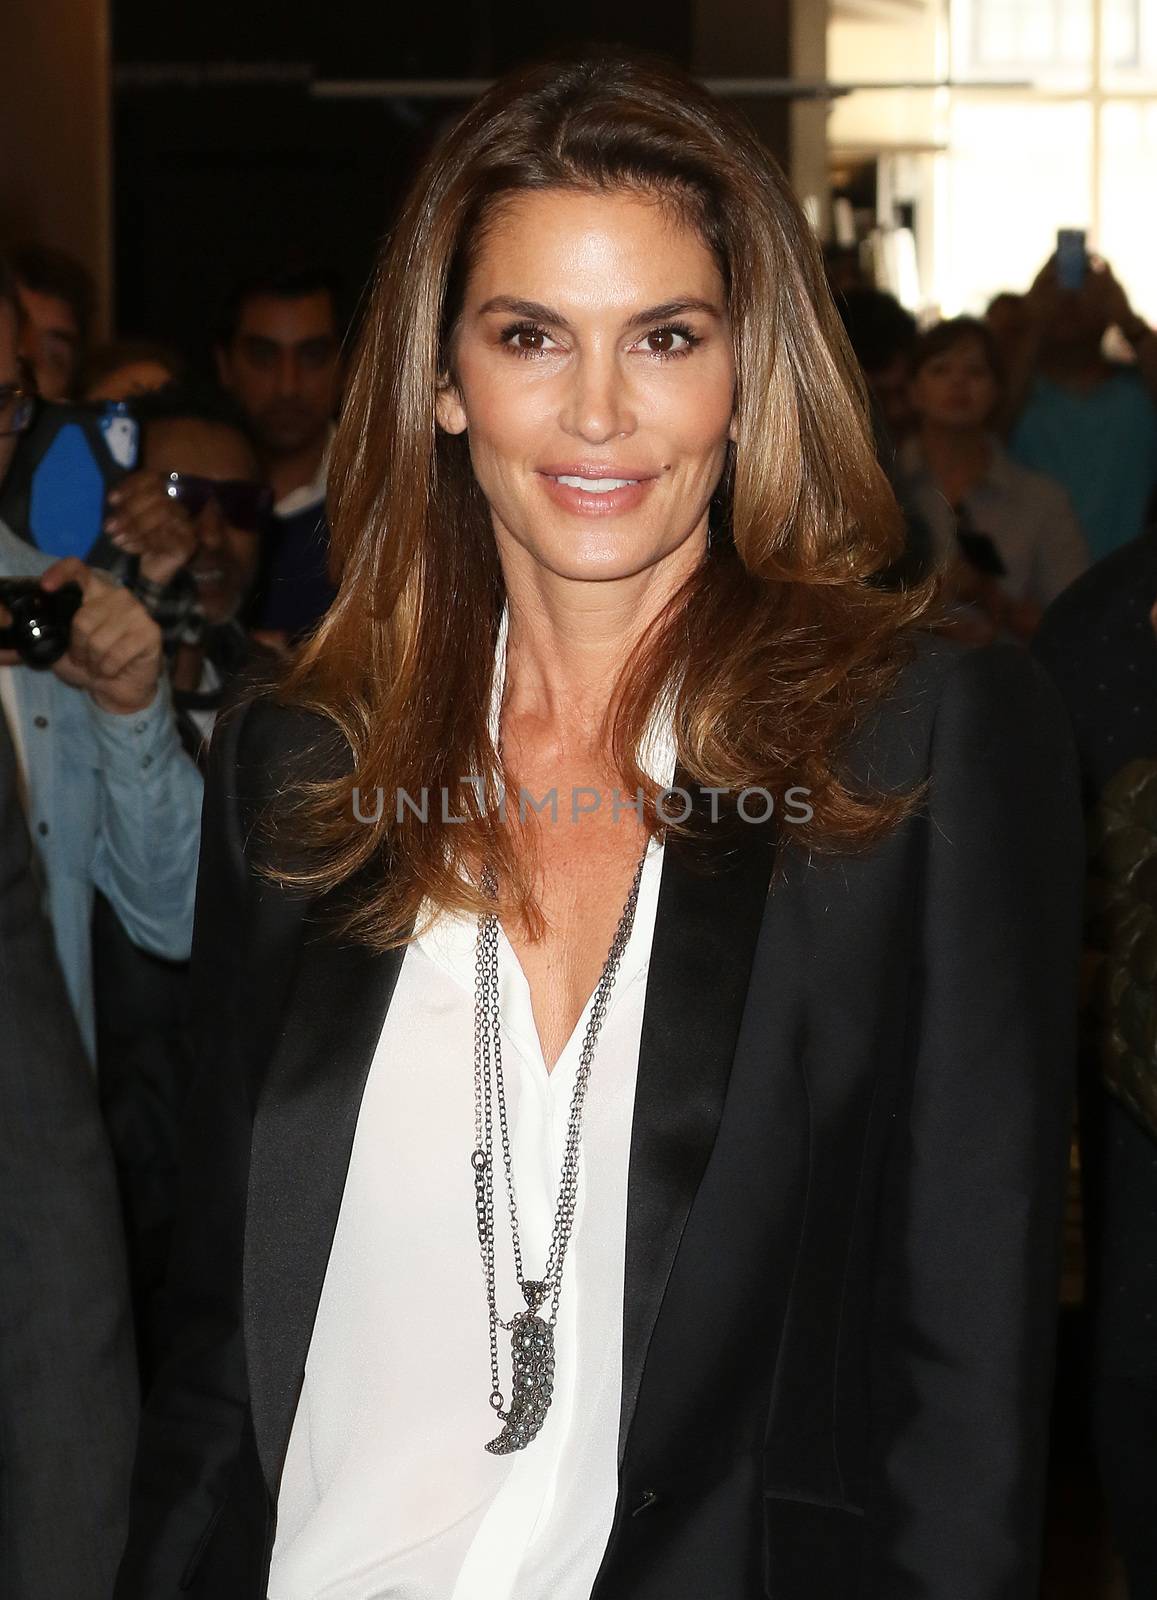 UK, London: American supermodel Cindy Crawford, best known for being one of the five original supermodels discussed her new book and signed copies in Waterstones, London on September 2, 2015. Becoming chronicles her life and career, as she prepares to turn 50 next February, and features some of her most memorable images. 